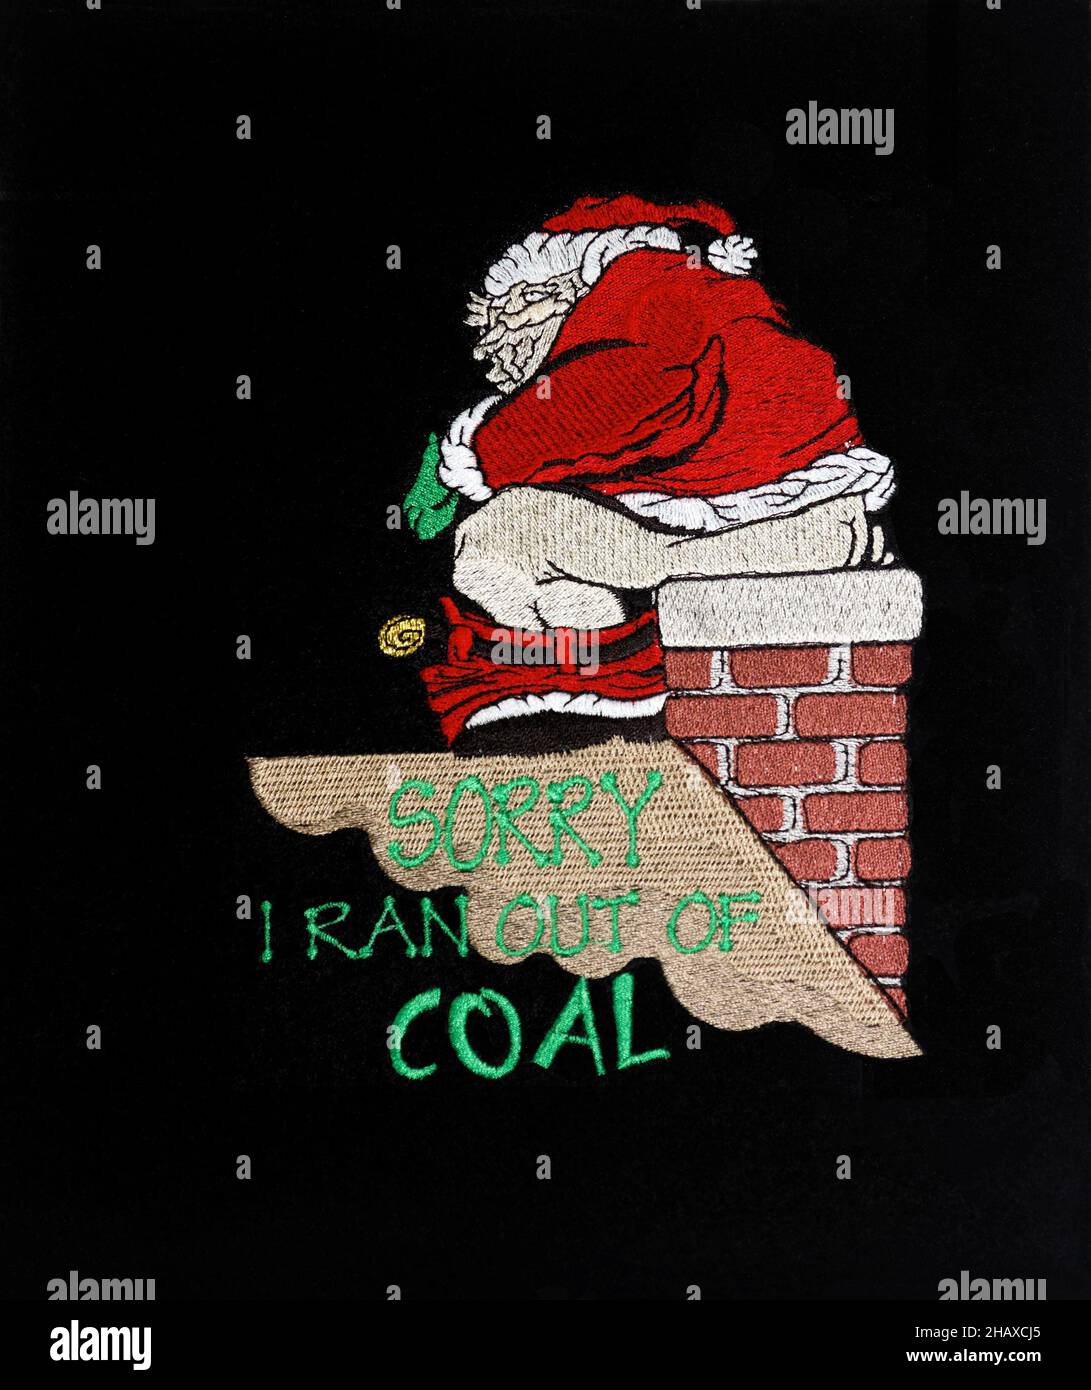 Christmas decoration, Santa, sitting on chimney, roof, pants down, using chimney as toilet, words 'Sorry I ran out of coal', humorous, black backgroun Stock Photo